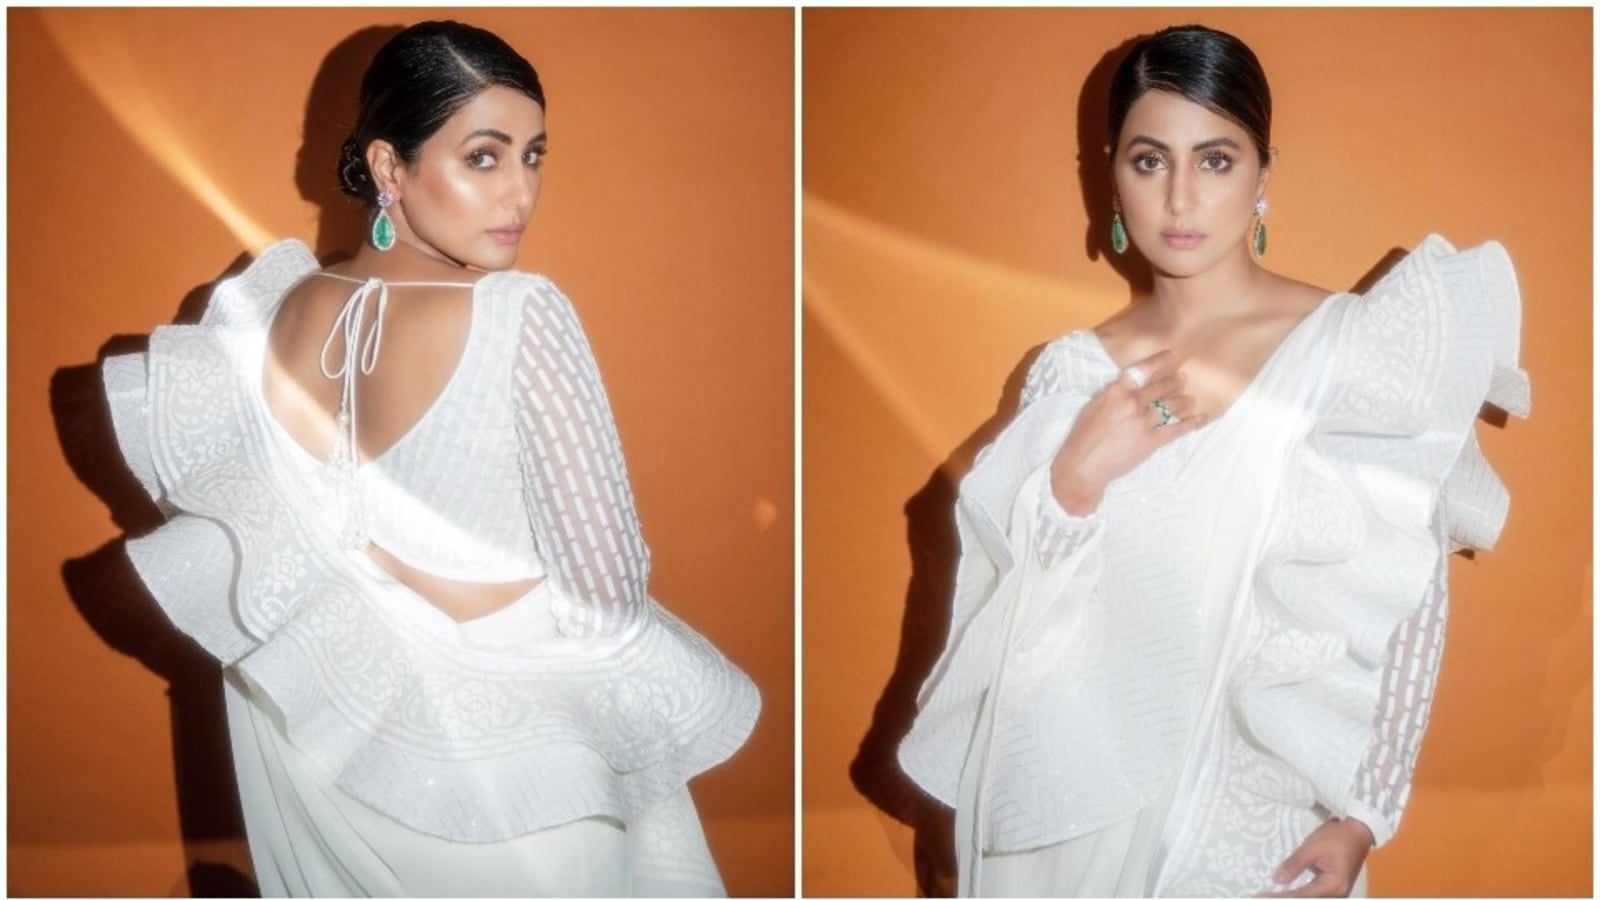 Hina Khan's unique white ruffled saree with pallu sleeve is the festive fix  your Durga Puja closet needs: All pics | Fashion Trends - Hindustan Times